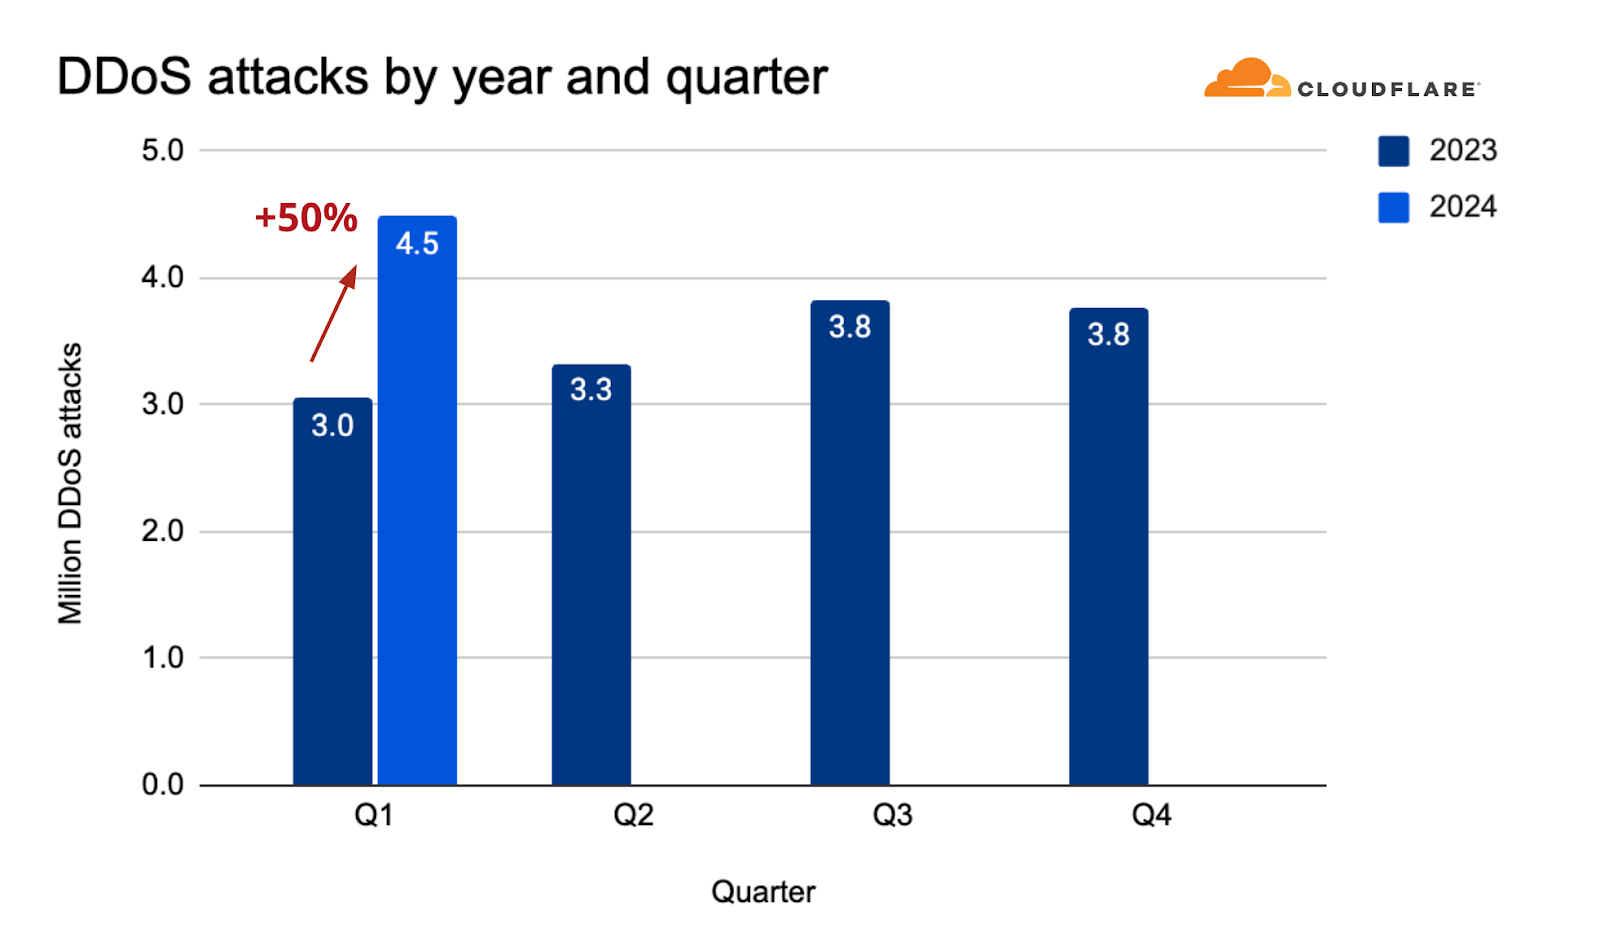 DDoS attacks by year and quarter